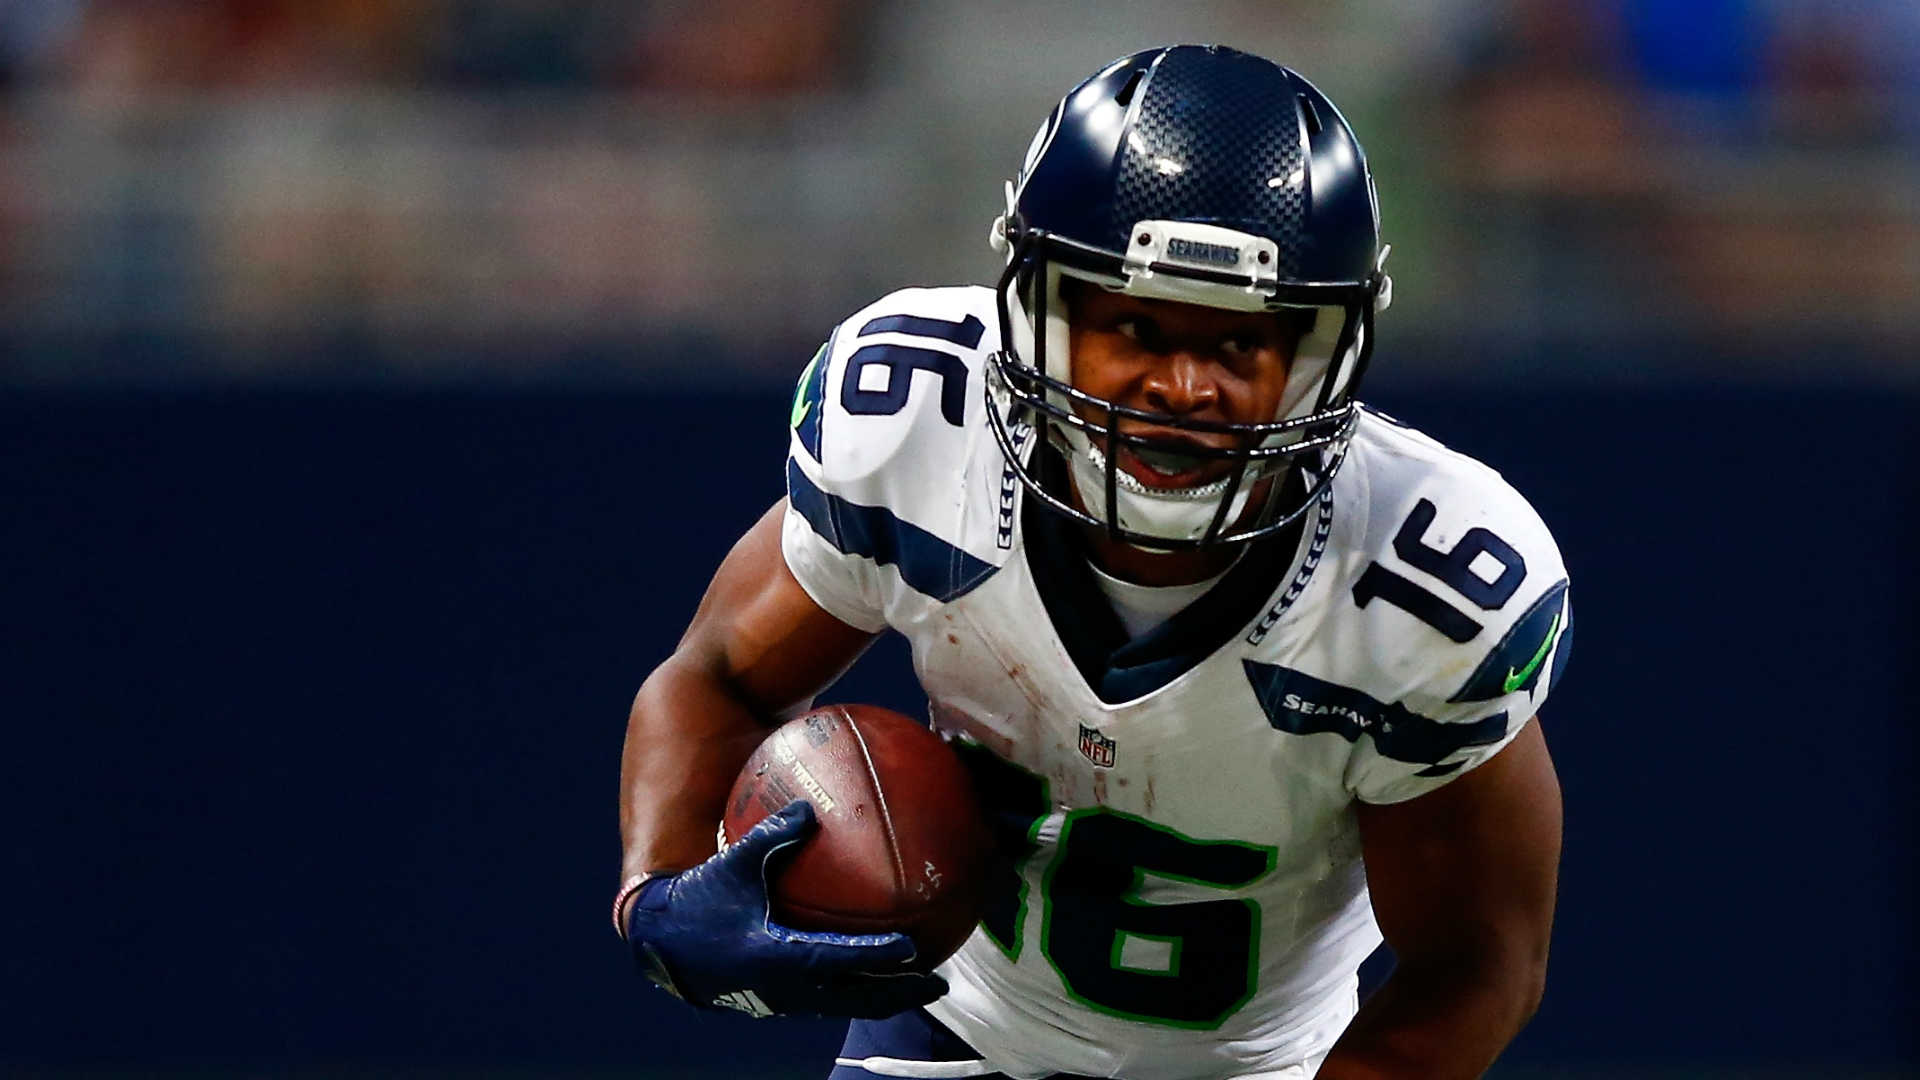 Tyler Lockett Small Stature Large Character Praiseworthy and